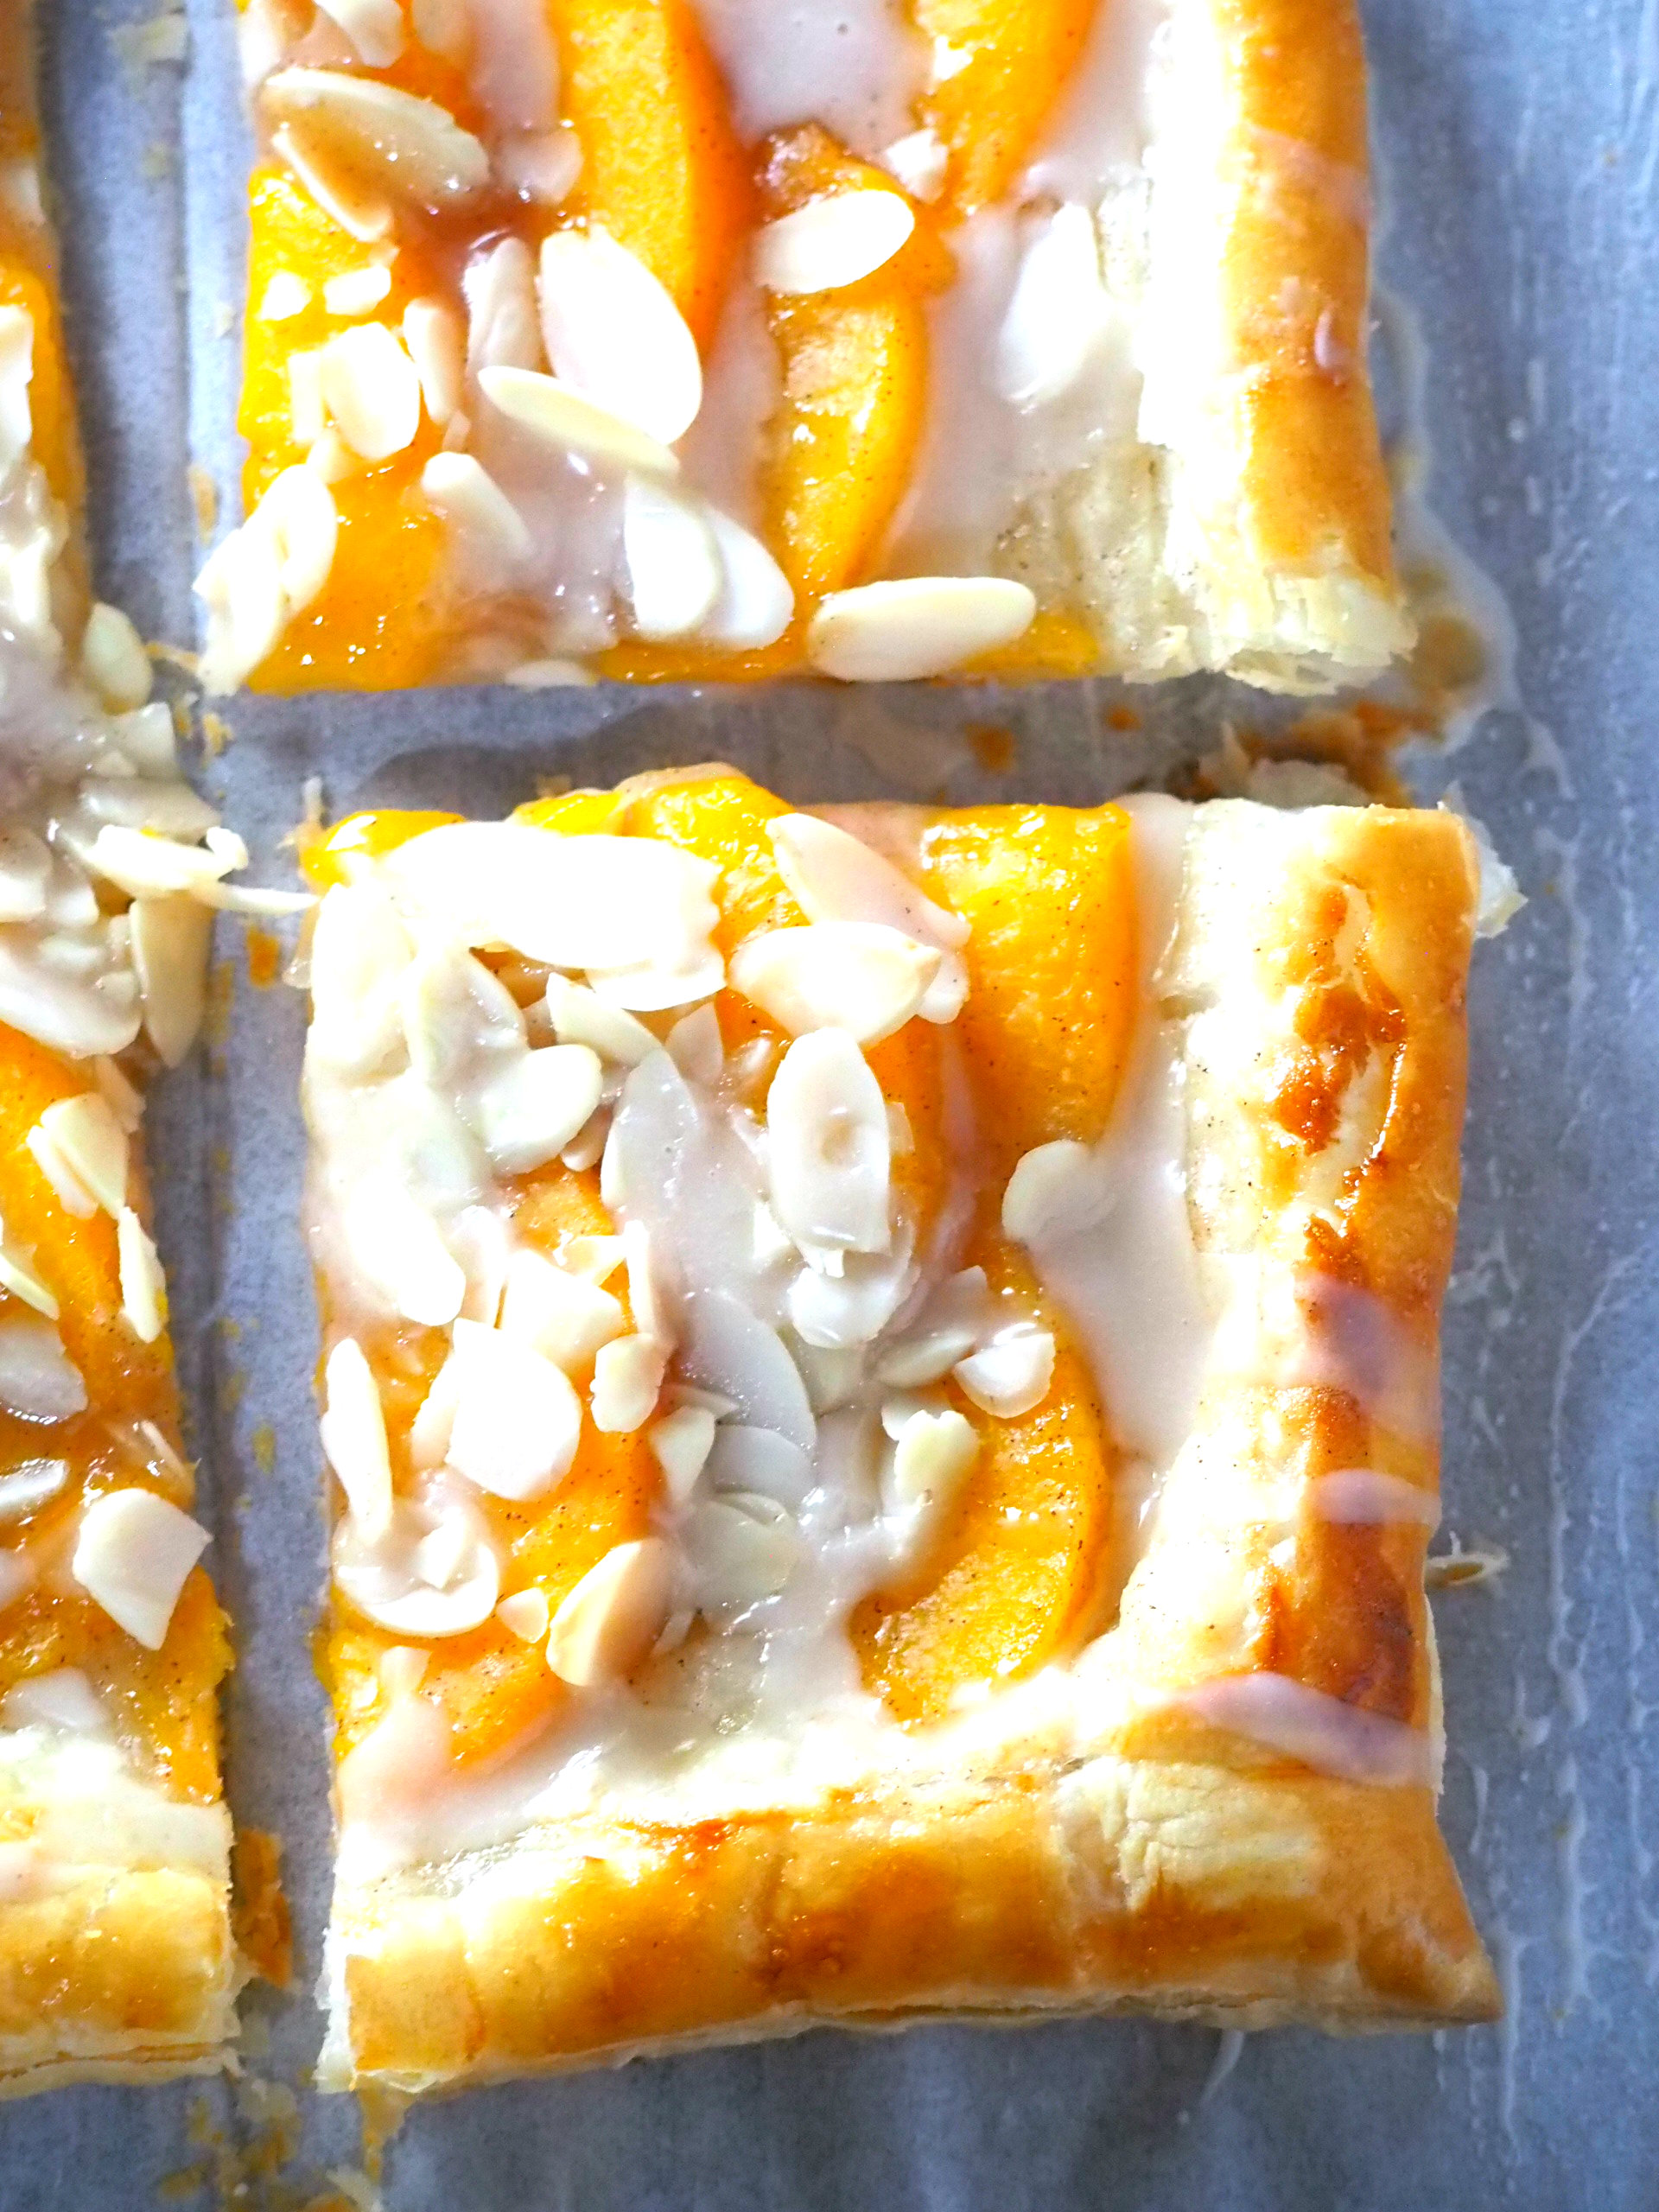 If you want an easy dessert recipe, this peach tart is a pastry dessert that you can make in no time using ready made puff pastry and a can of peach slices.